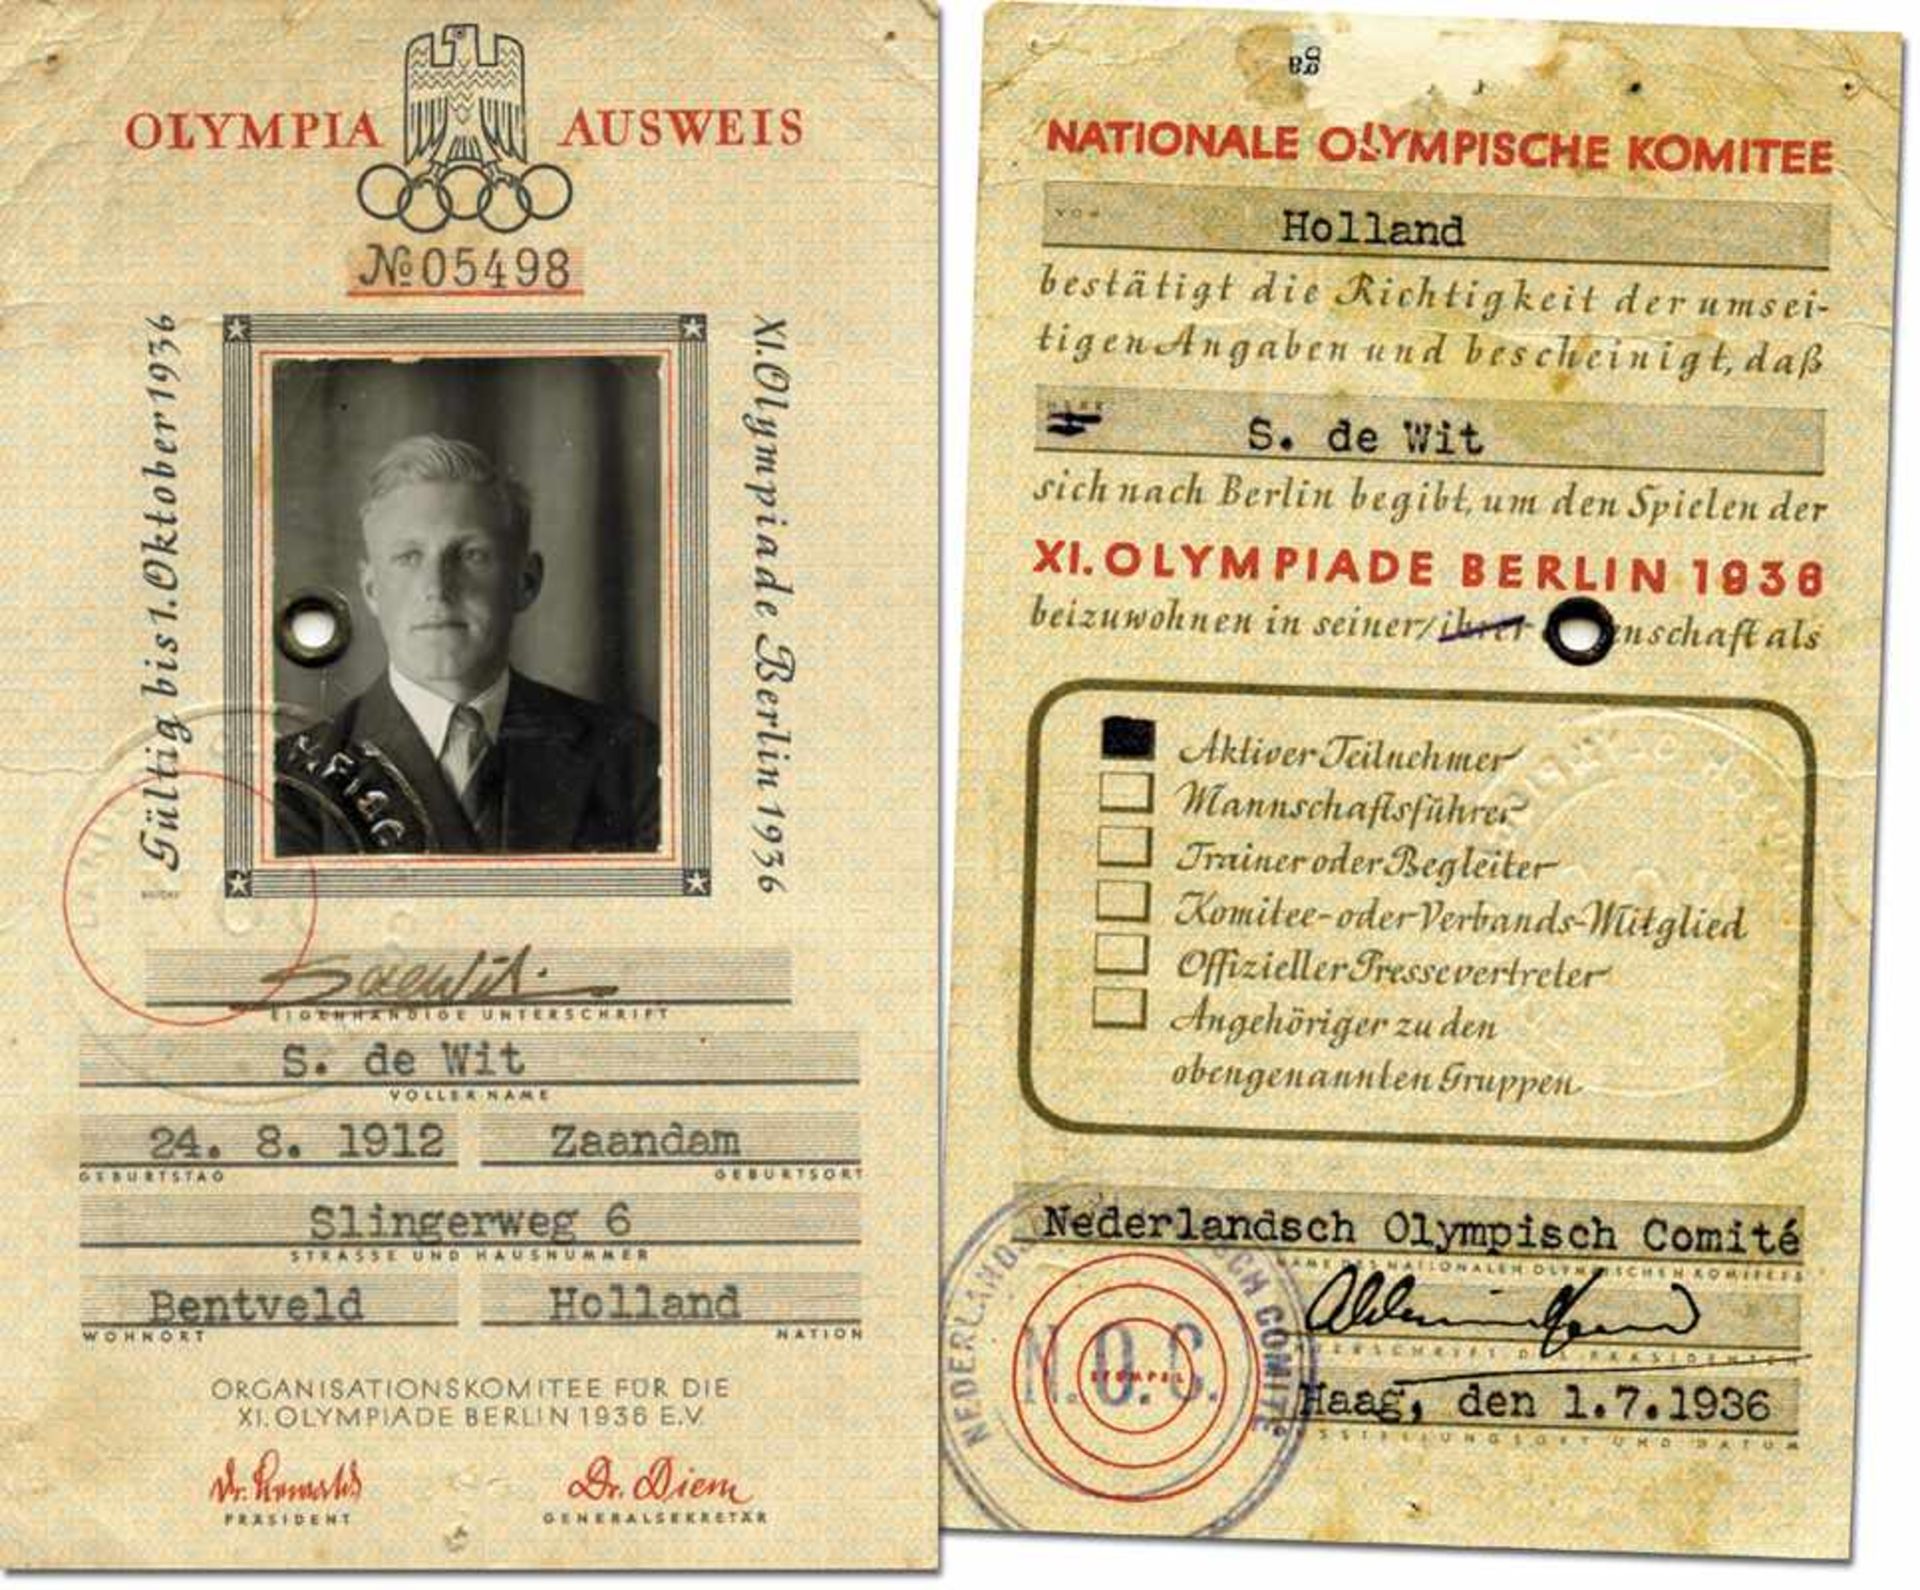 Olympic Games 1936 ID Card Netherlands Rowing - Official Olympic Games 1936 ID no 0498 for Dutch